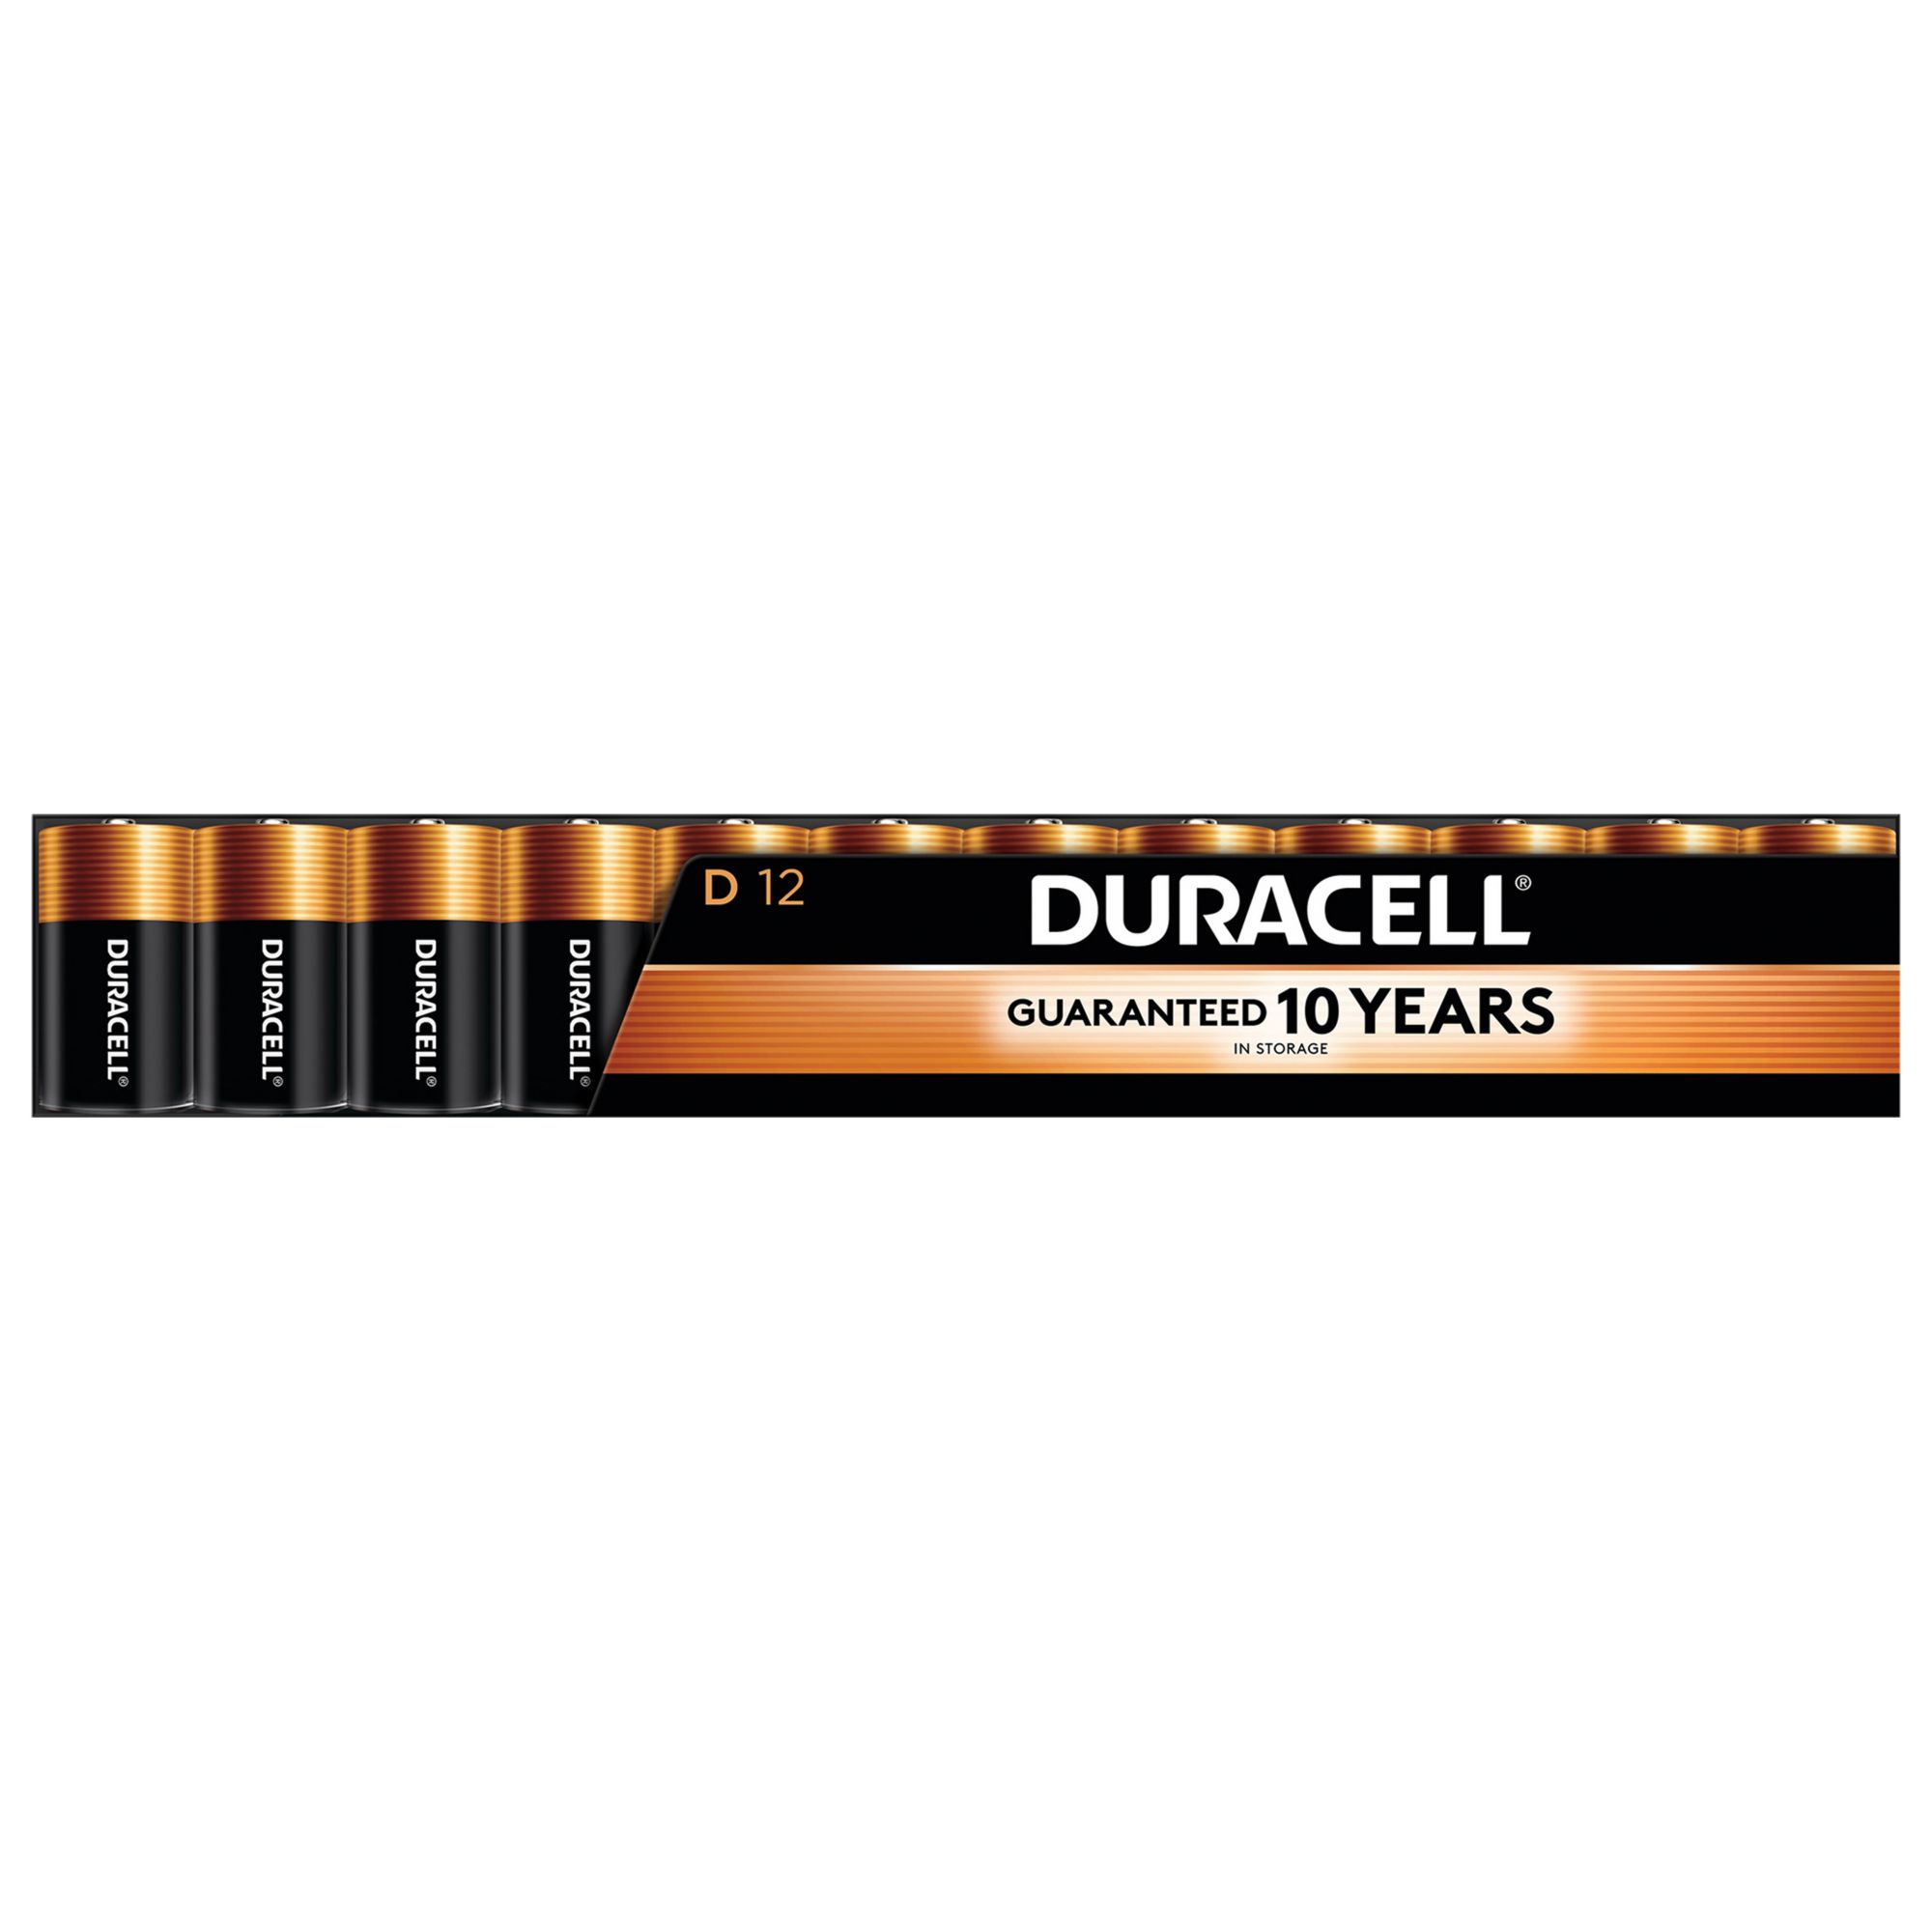 Duracell Coppertop Alkaline D Battery (Multi-Pack 3) (4-Count Pack)  004133305126 - The Home Depot